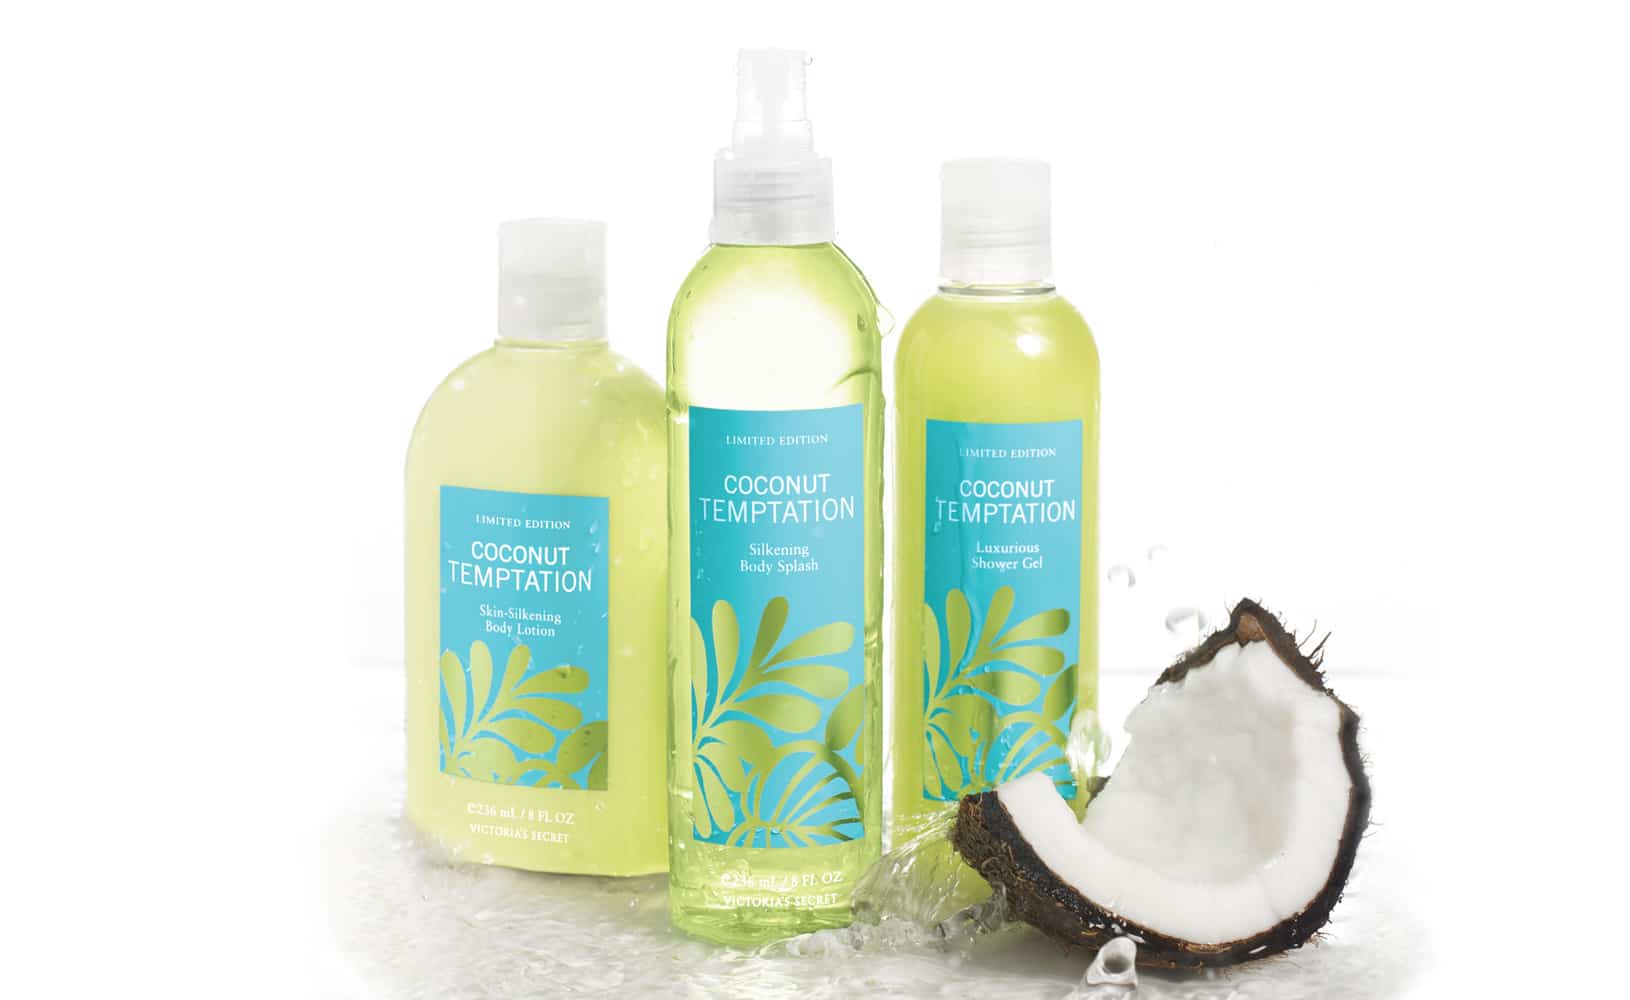 Bath and body packaging: Victoria's Secret Summer Promo packaging design for Coconut Temptation line with blues and greens with coconut slice.